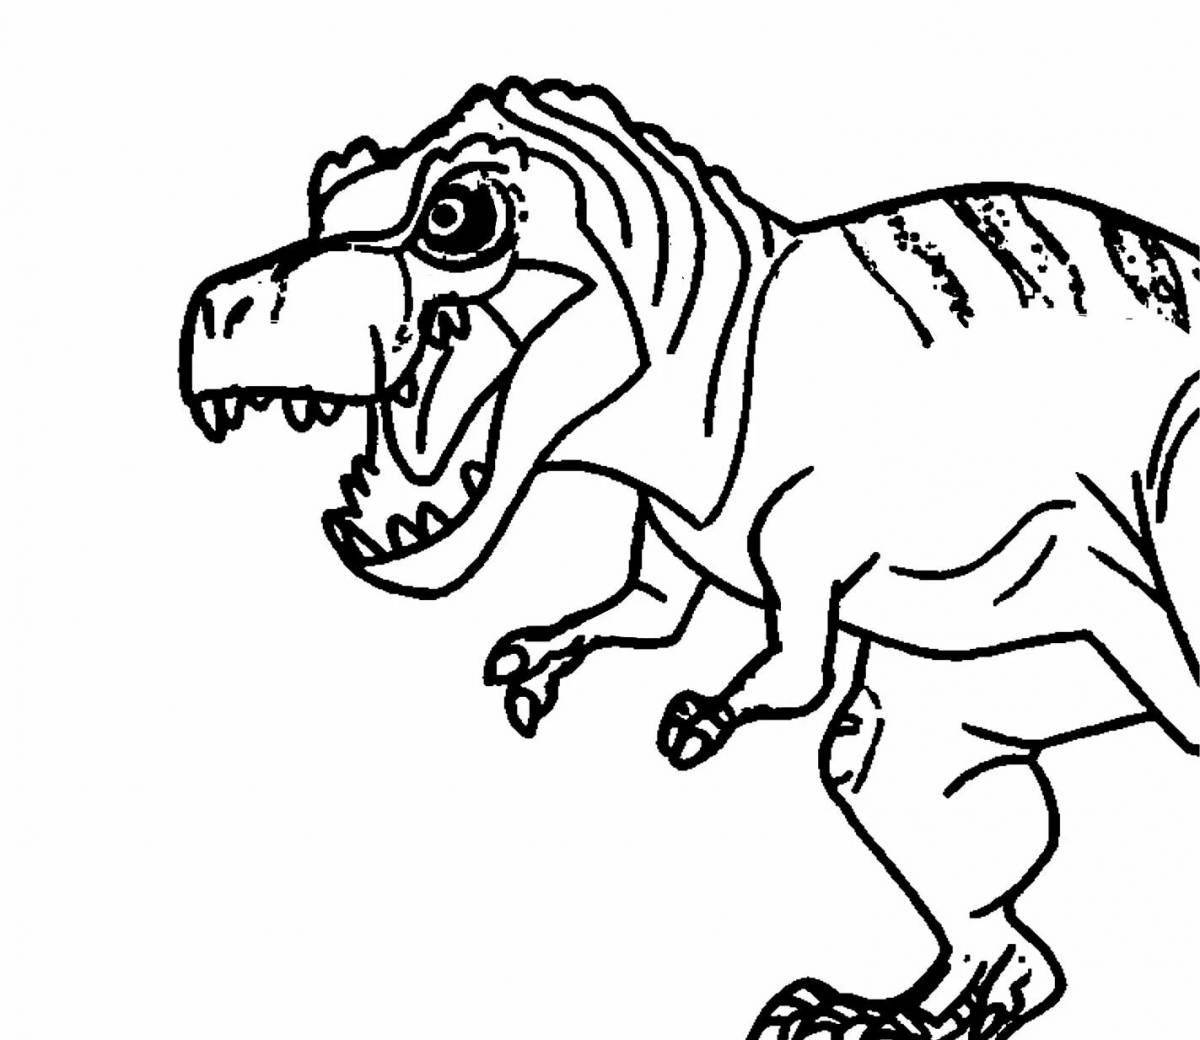 Impressive dinosaur coloring pages